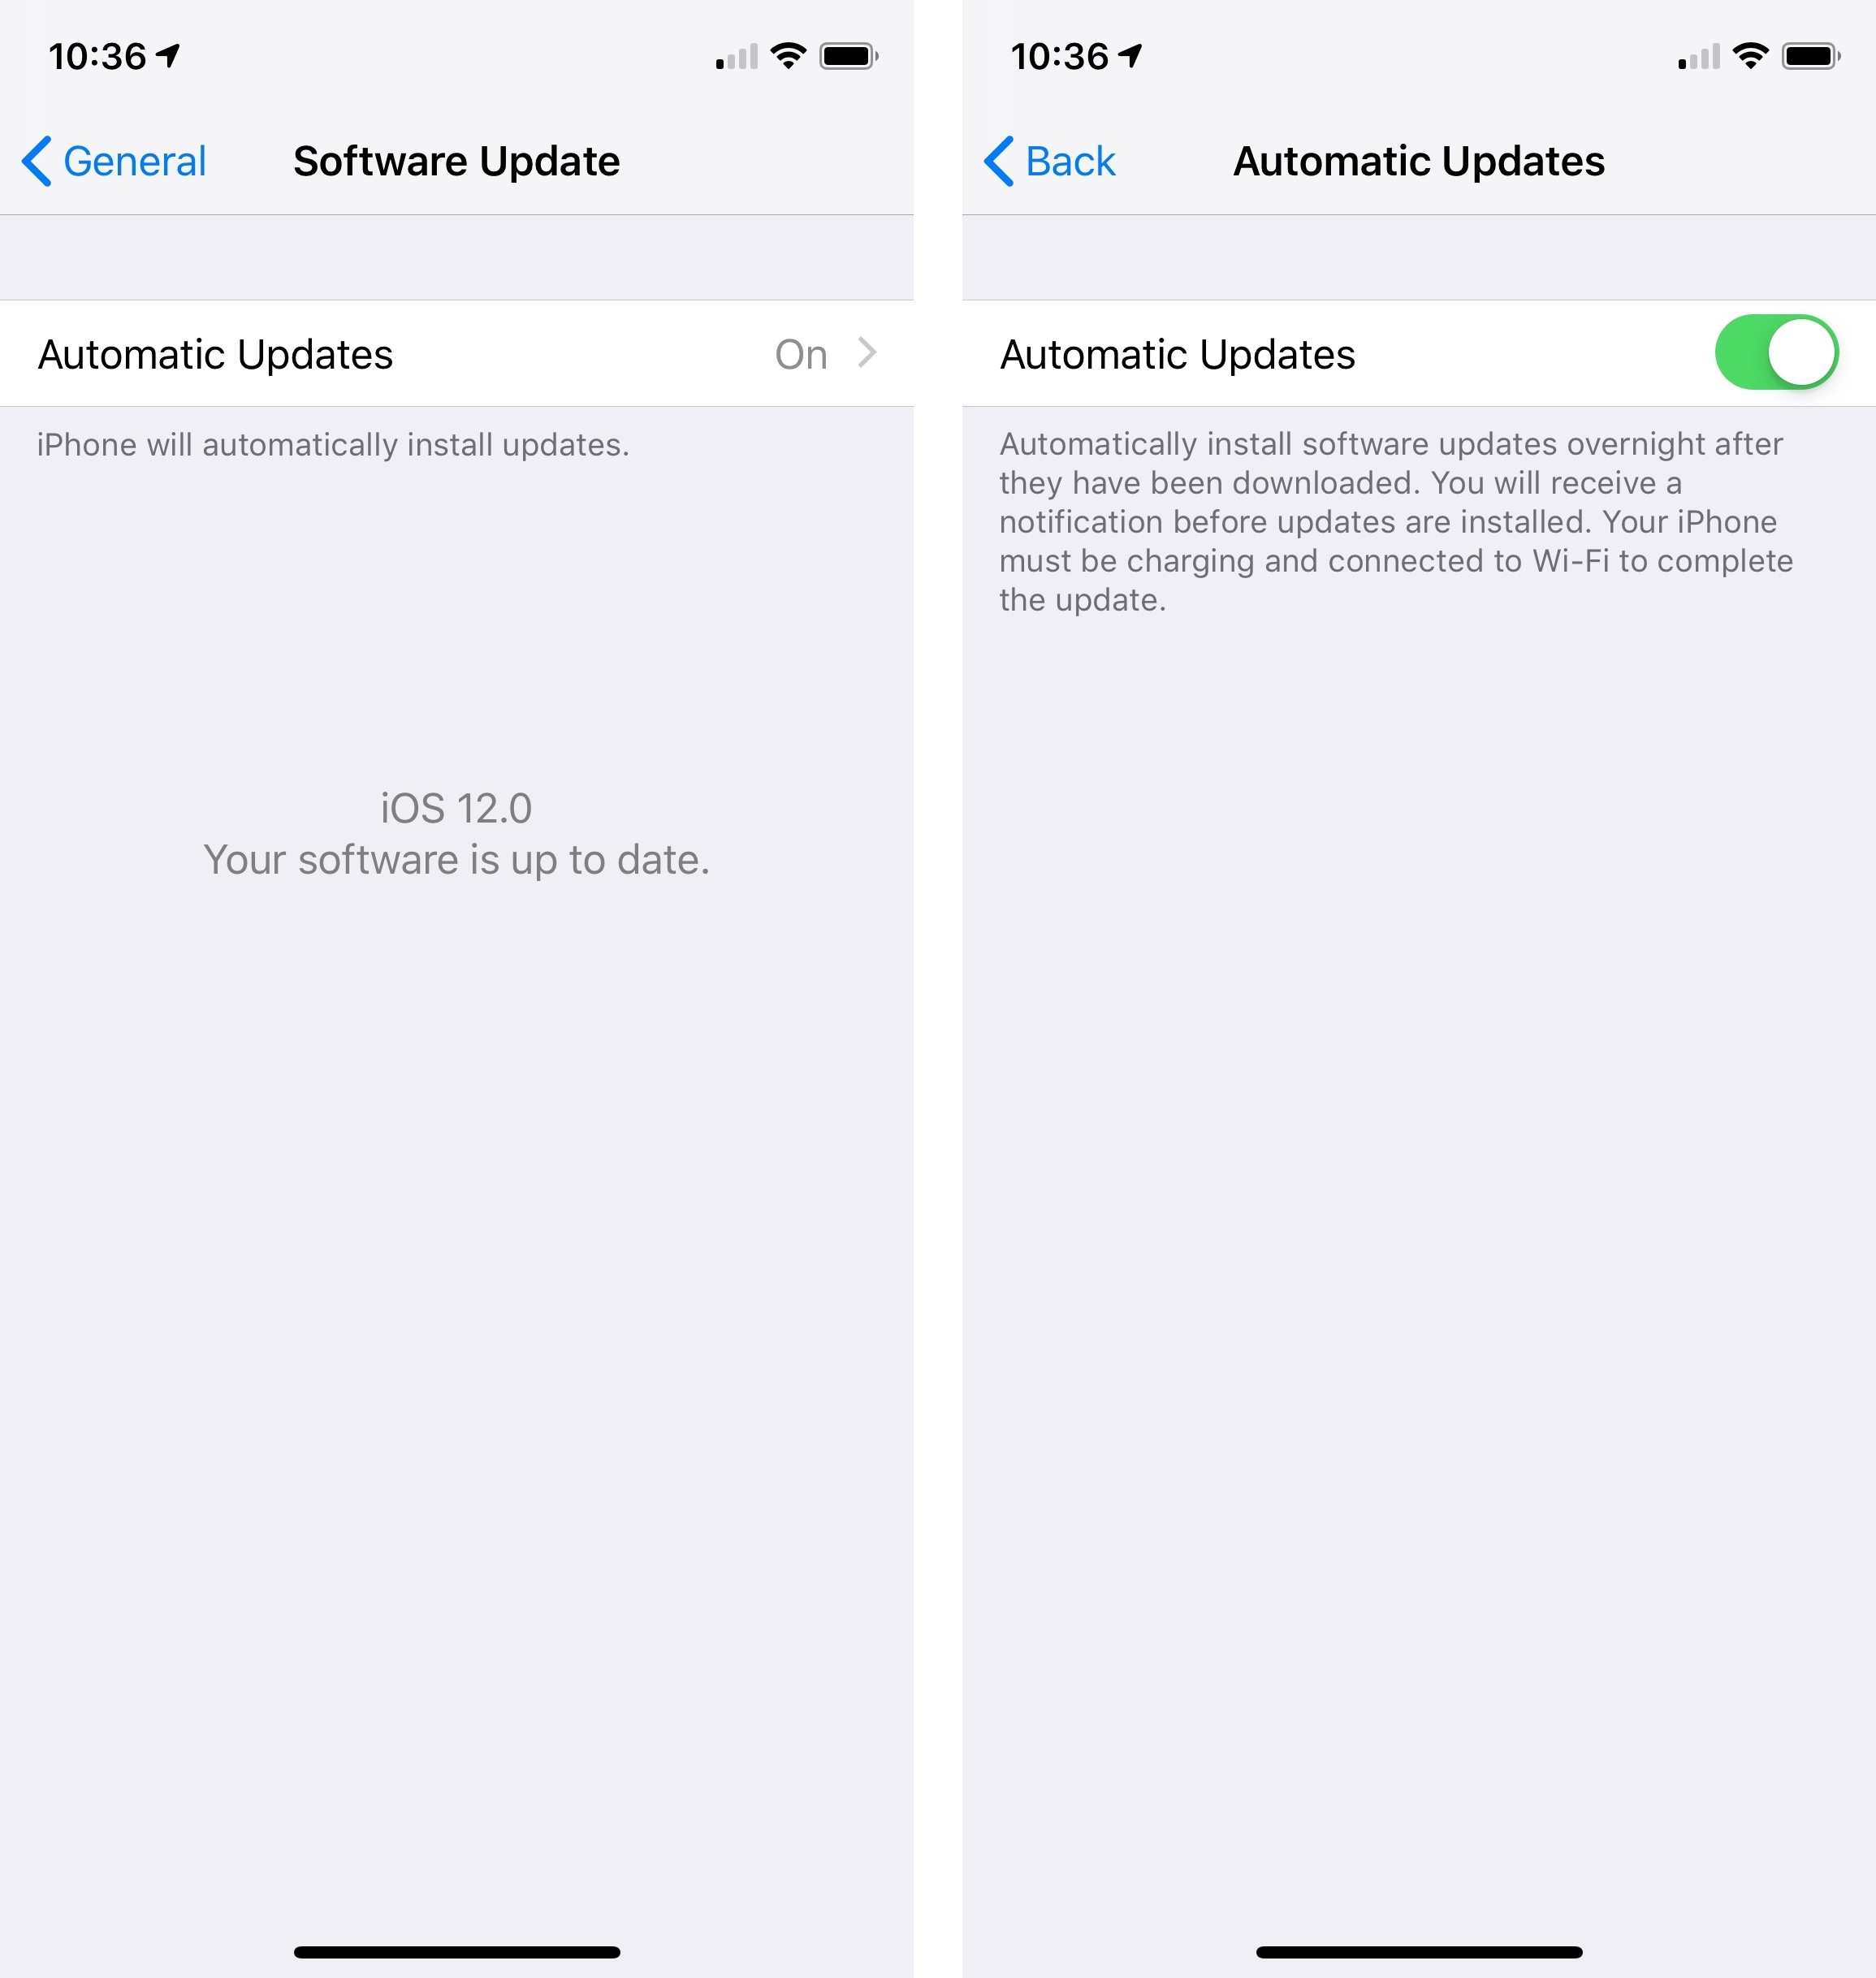 Automatic software update settings in iOS 12.